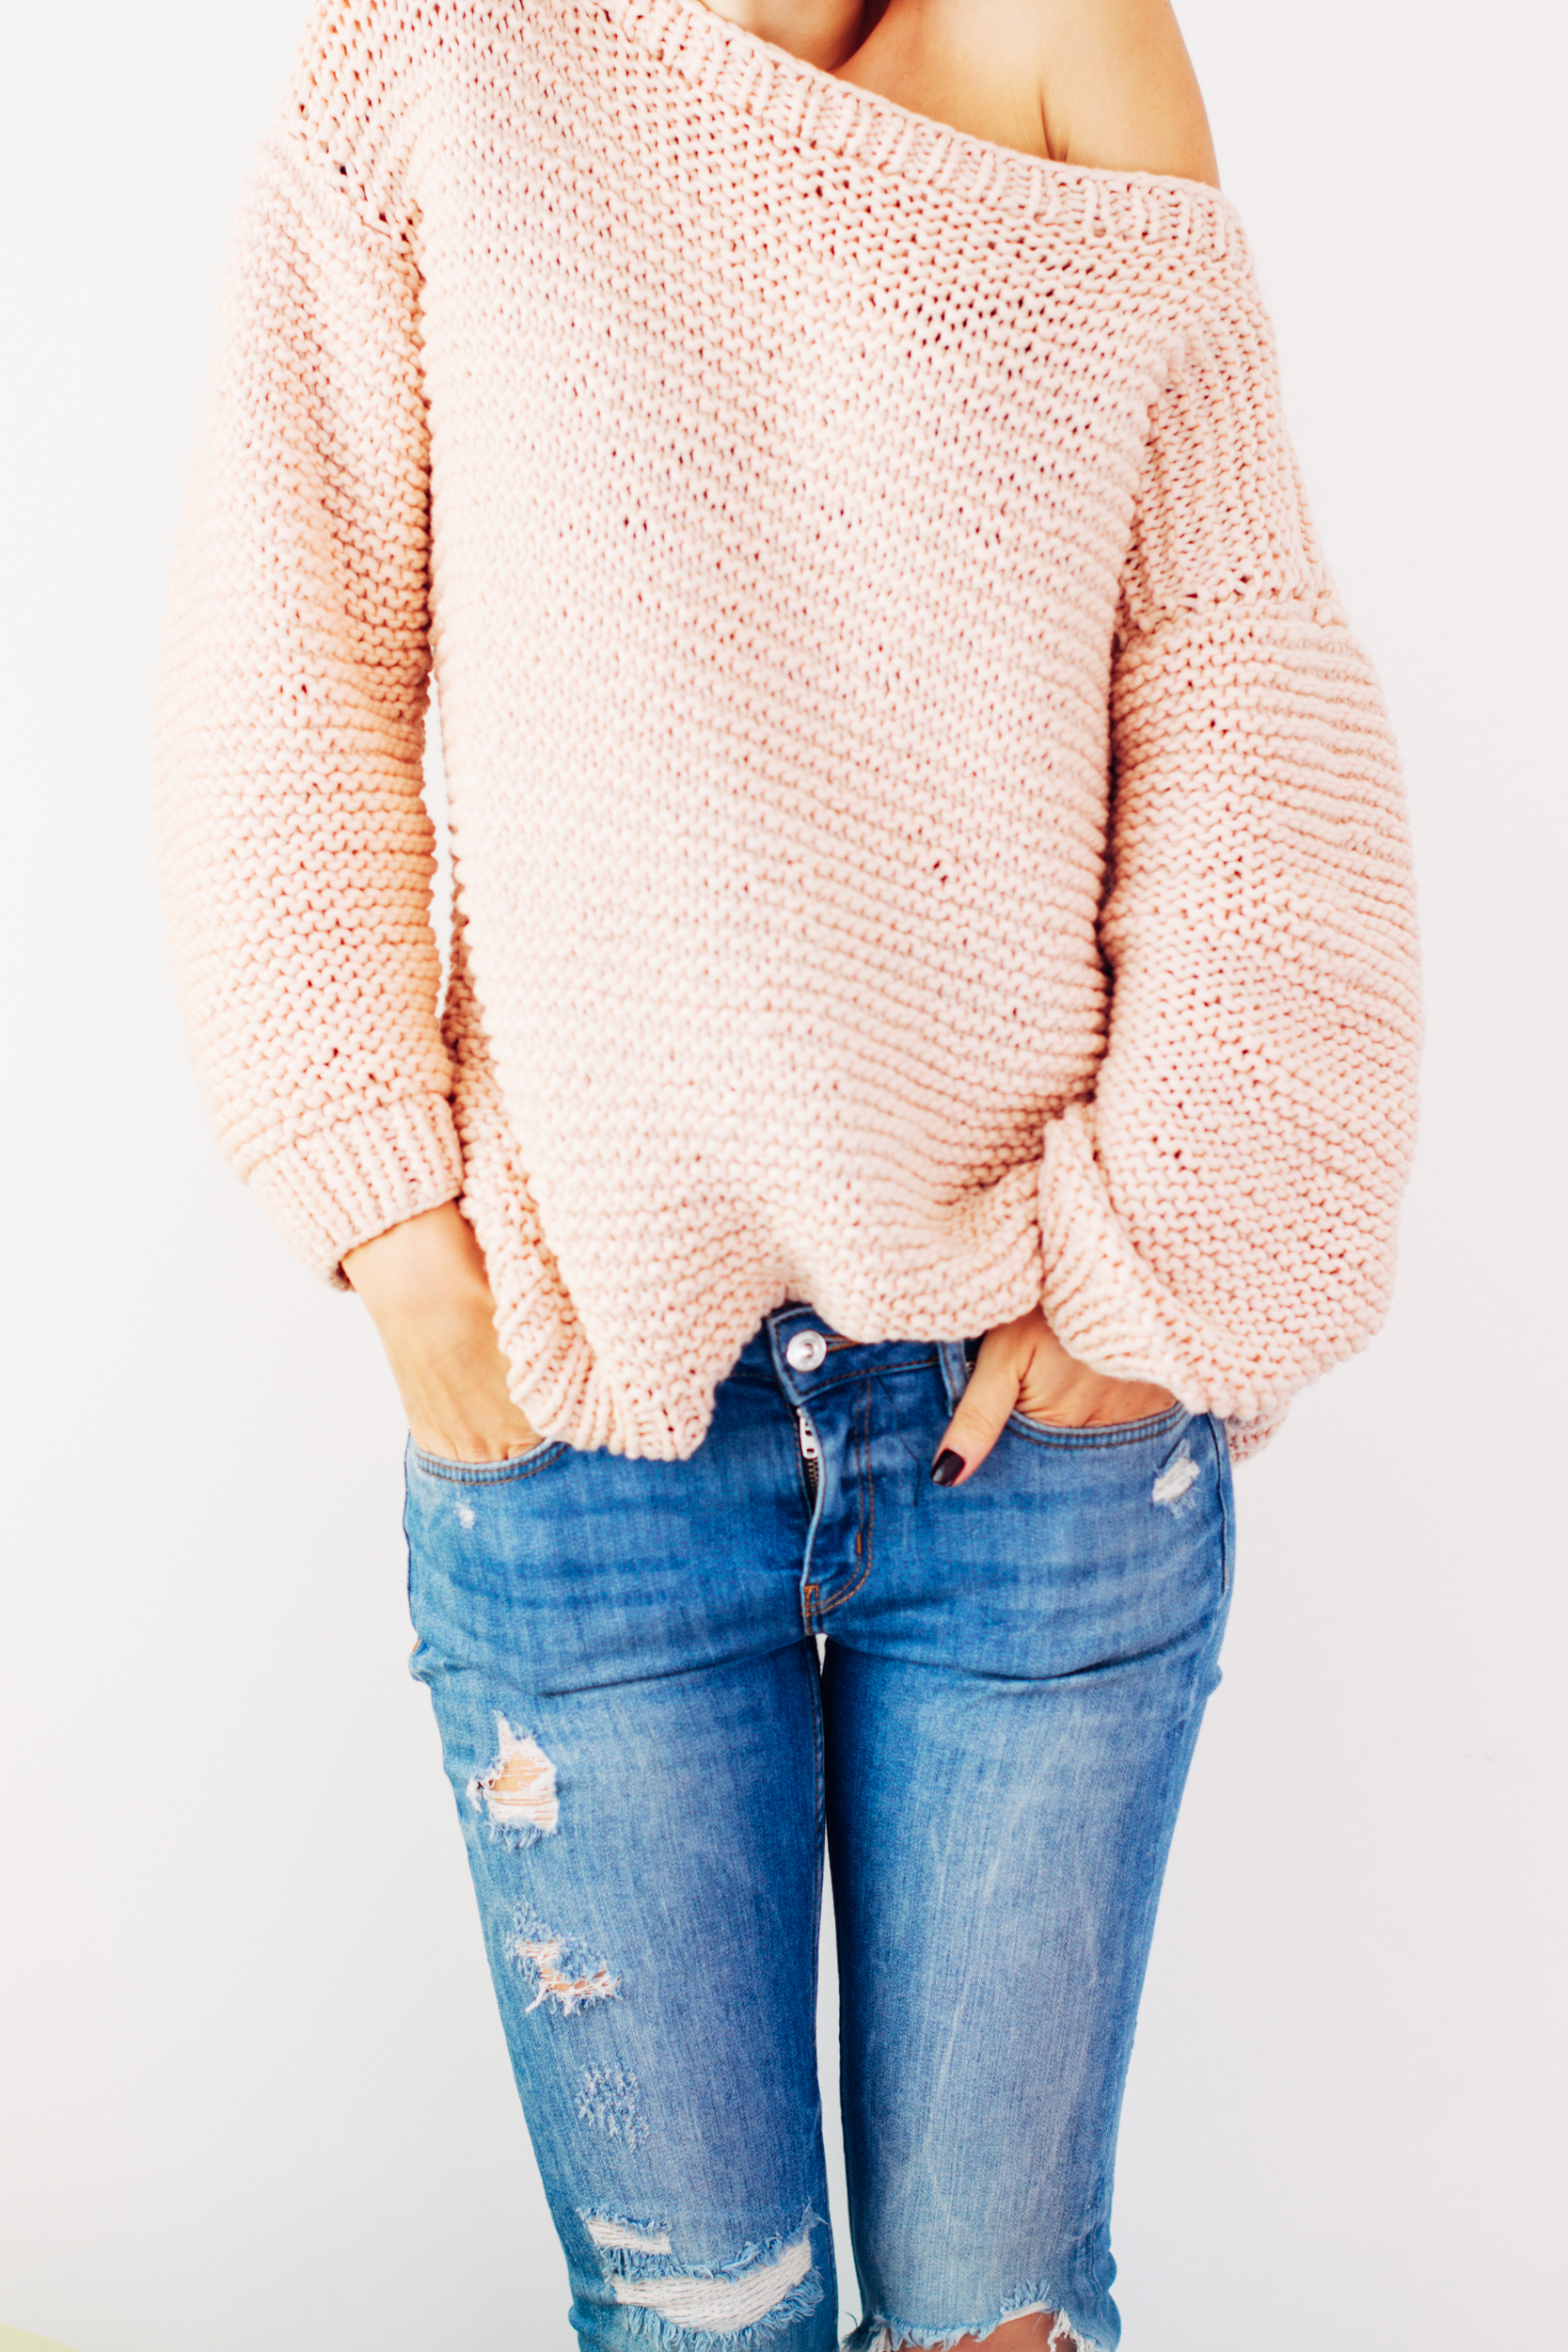 You Got This! Knit a Funky, Chunky, Oversized Sweater With ...